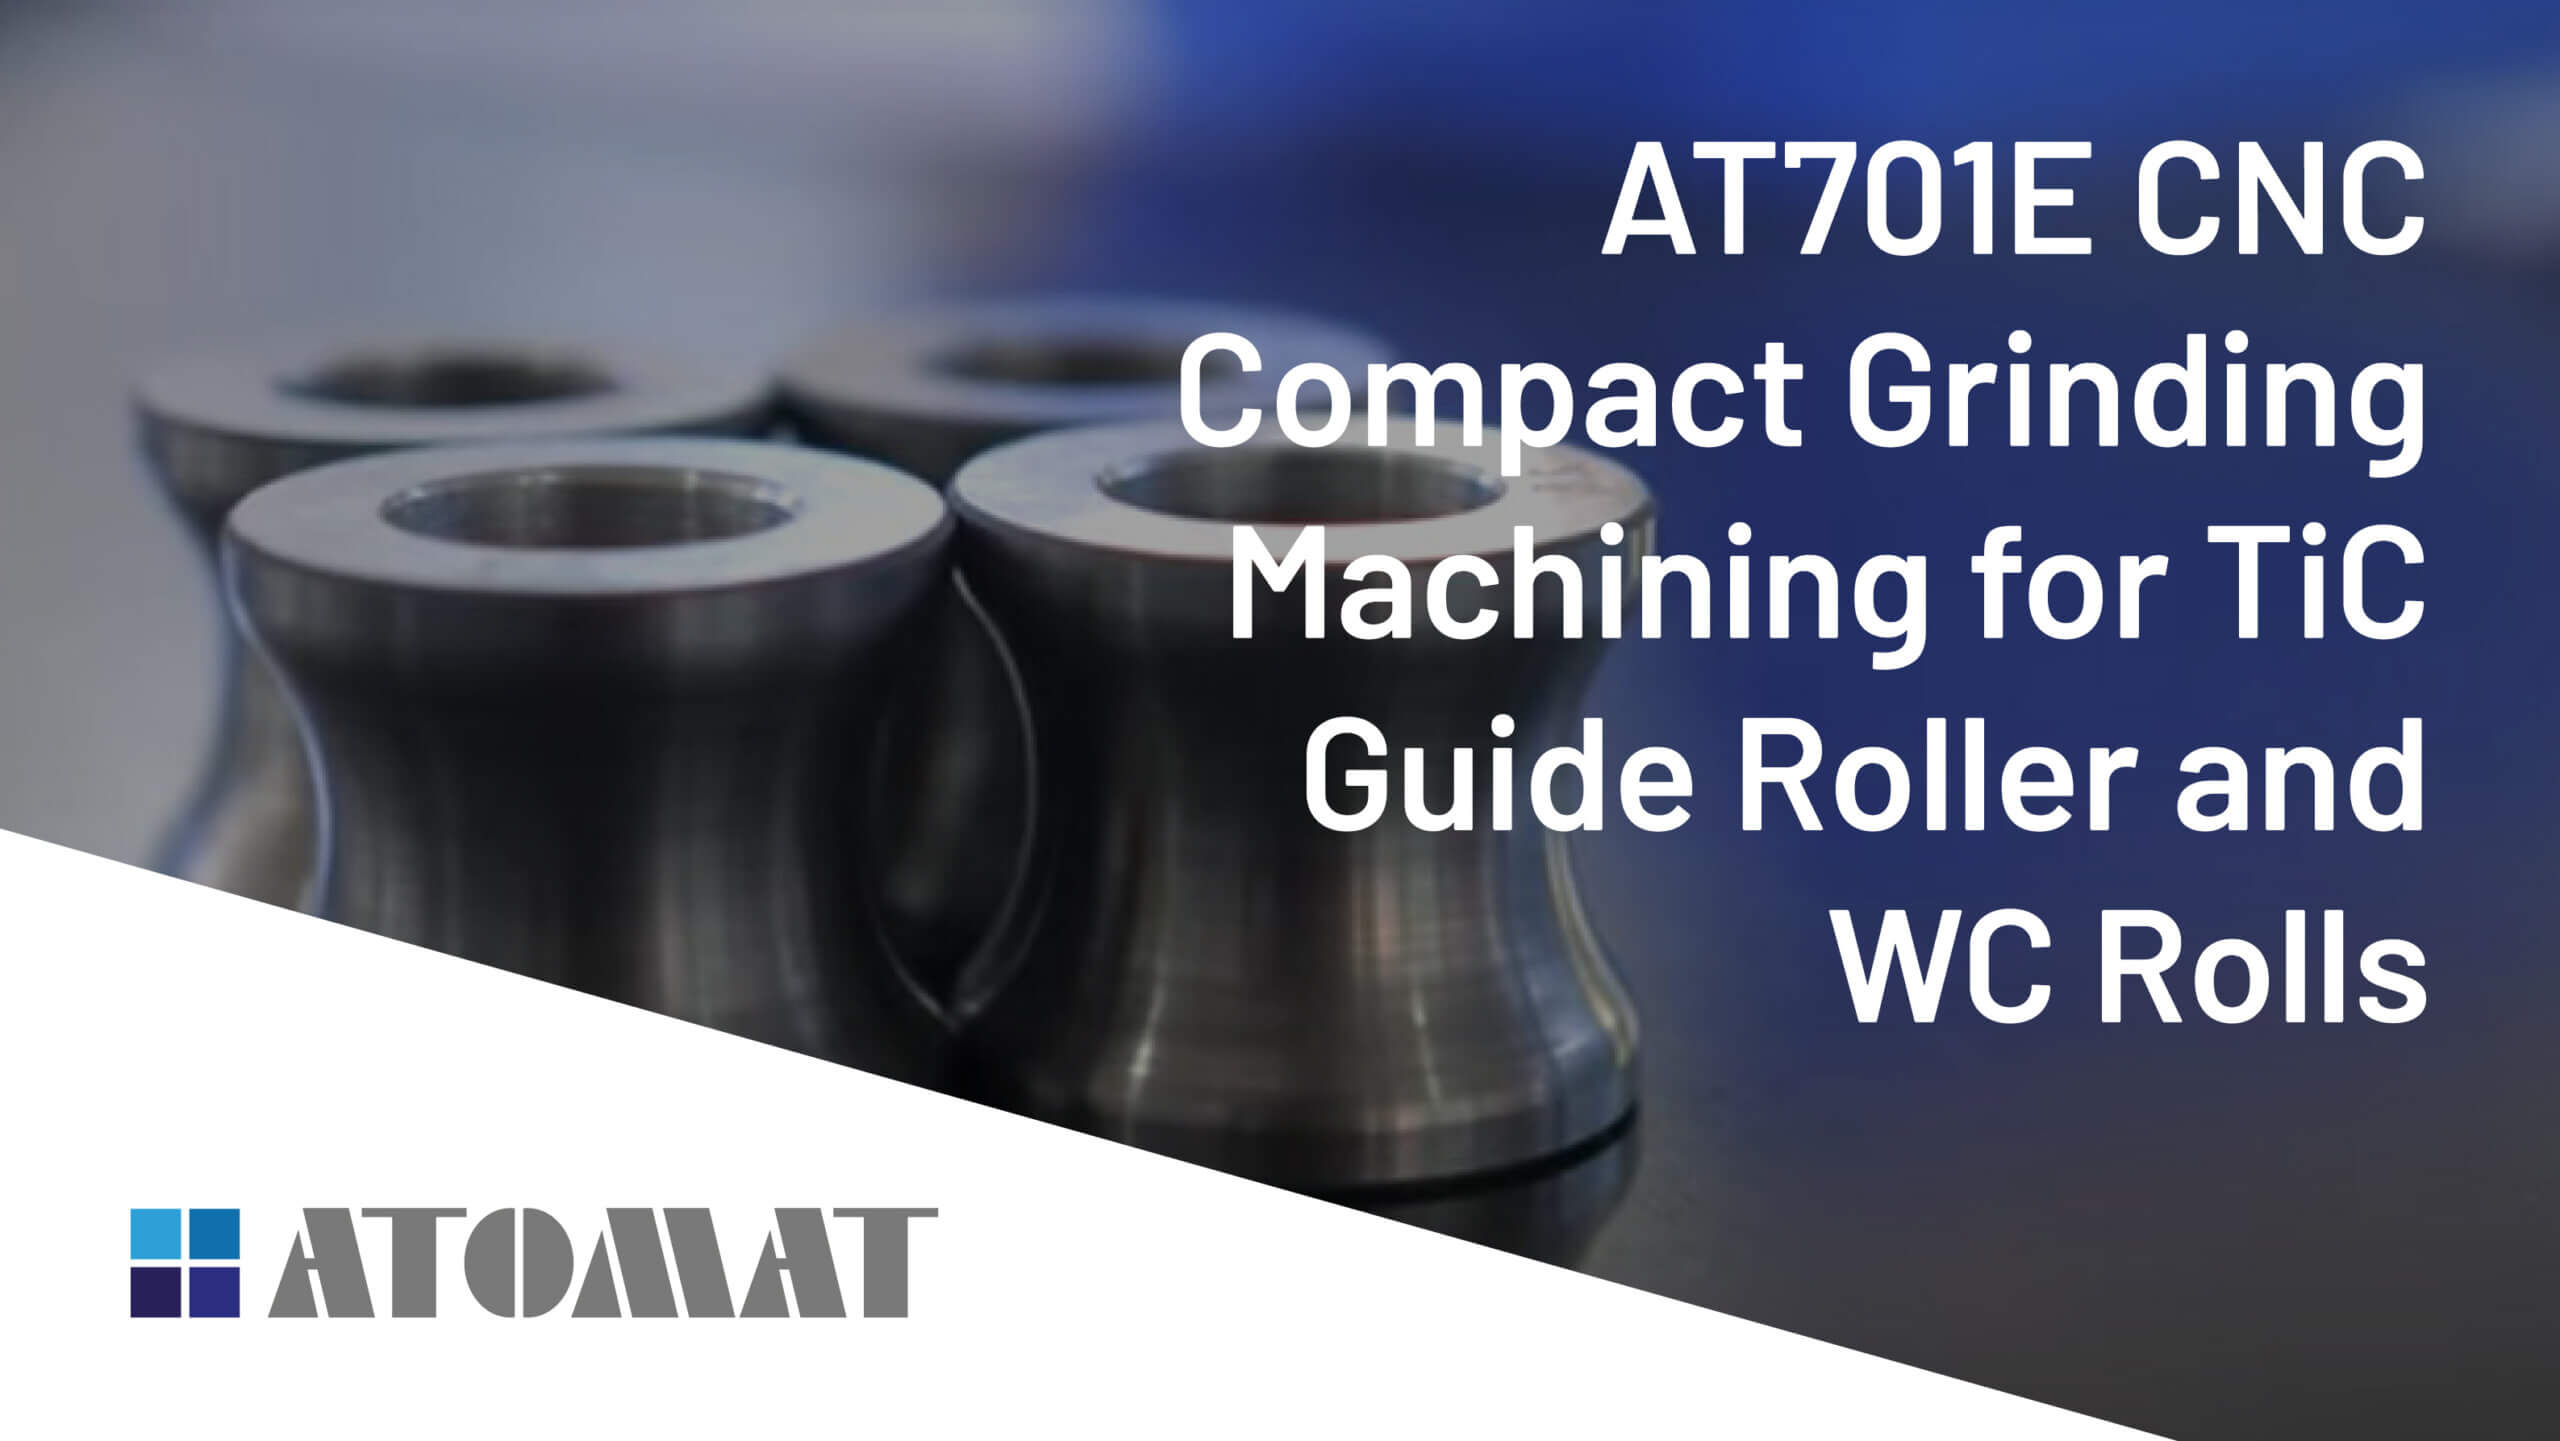 AT701E CNC Compact Grinding Machining for TiC Guide Roller and WC Rolls